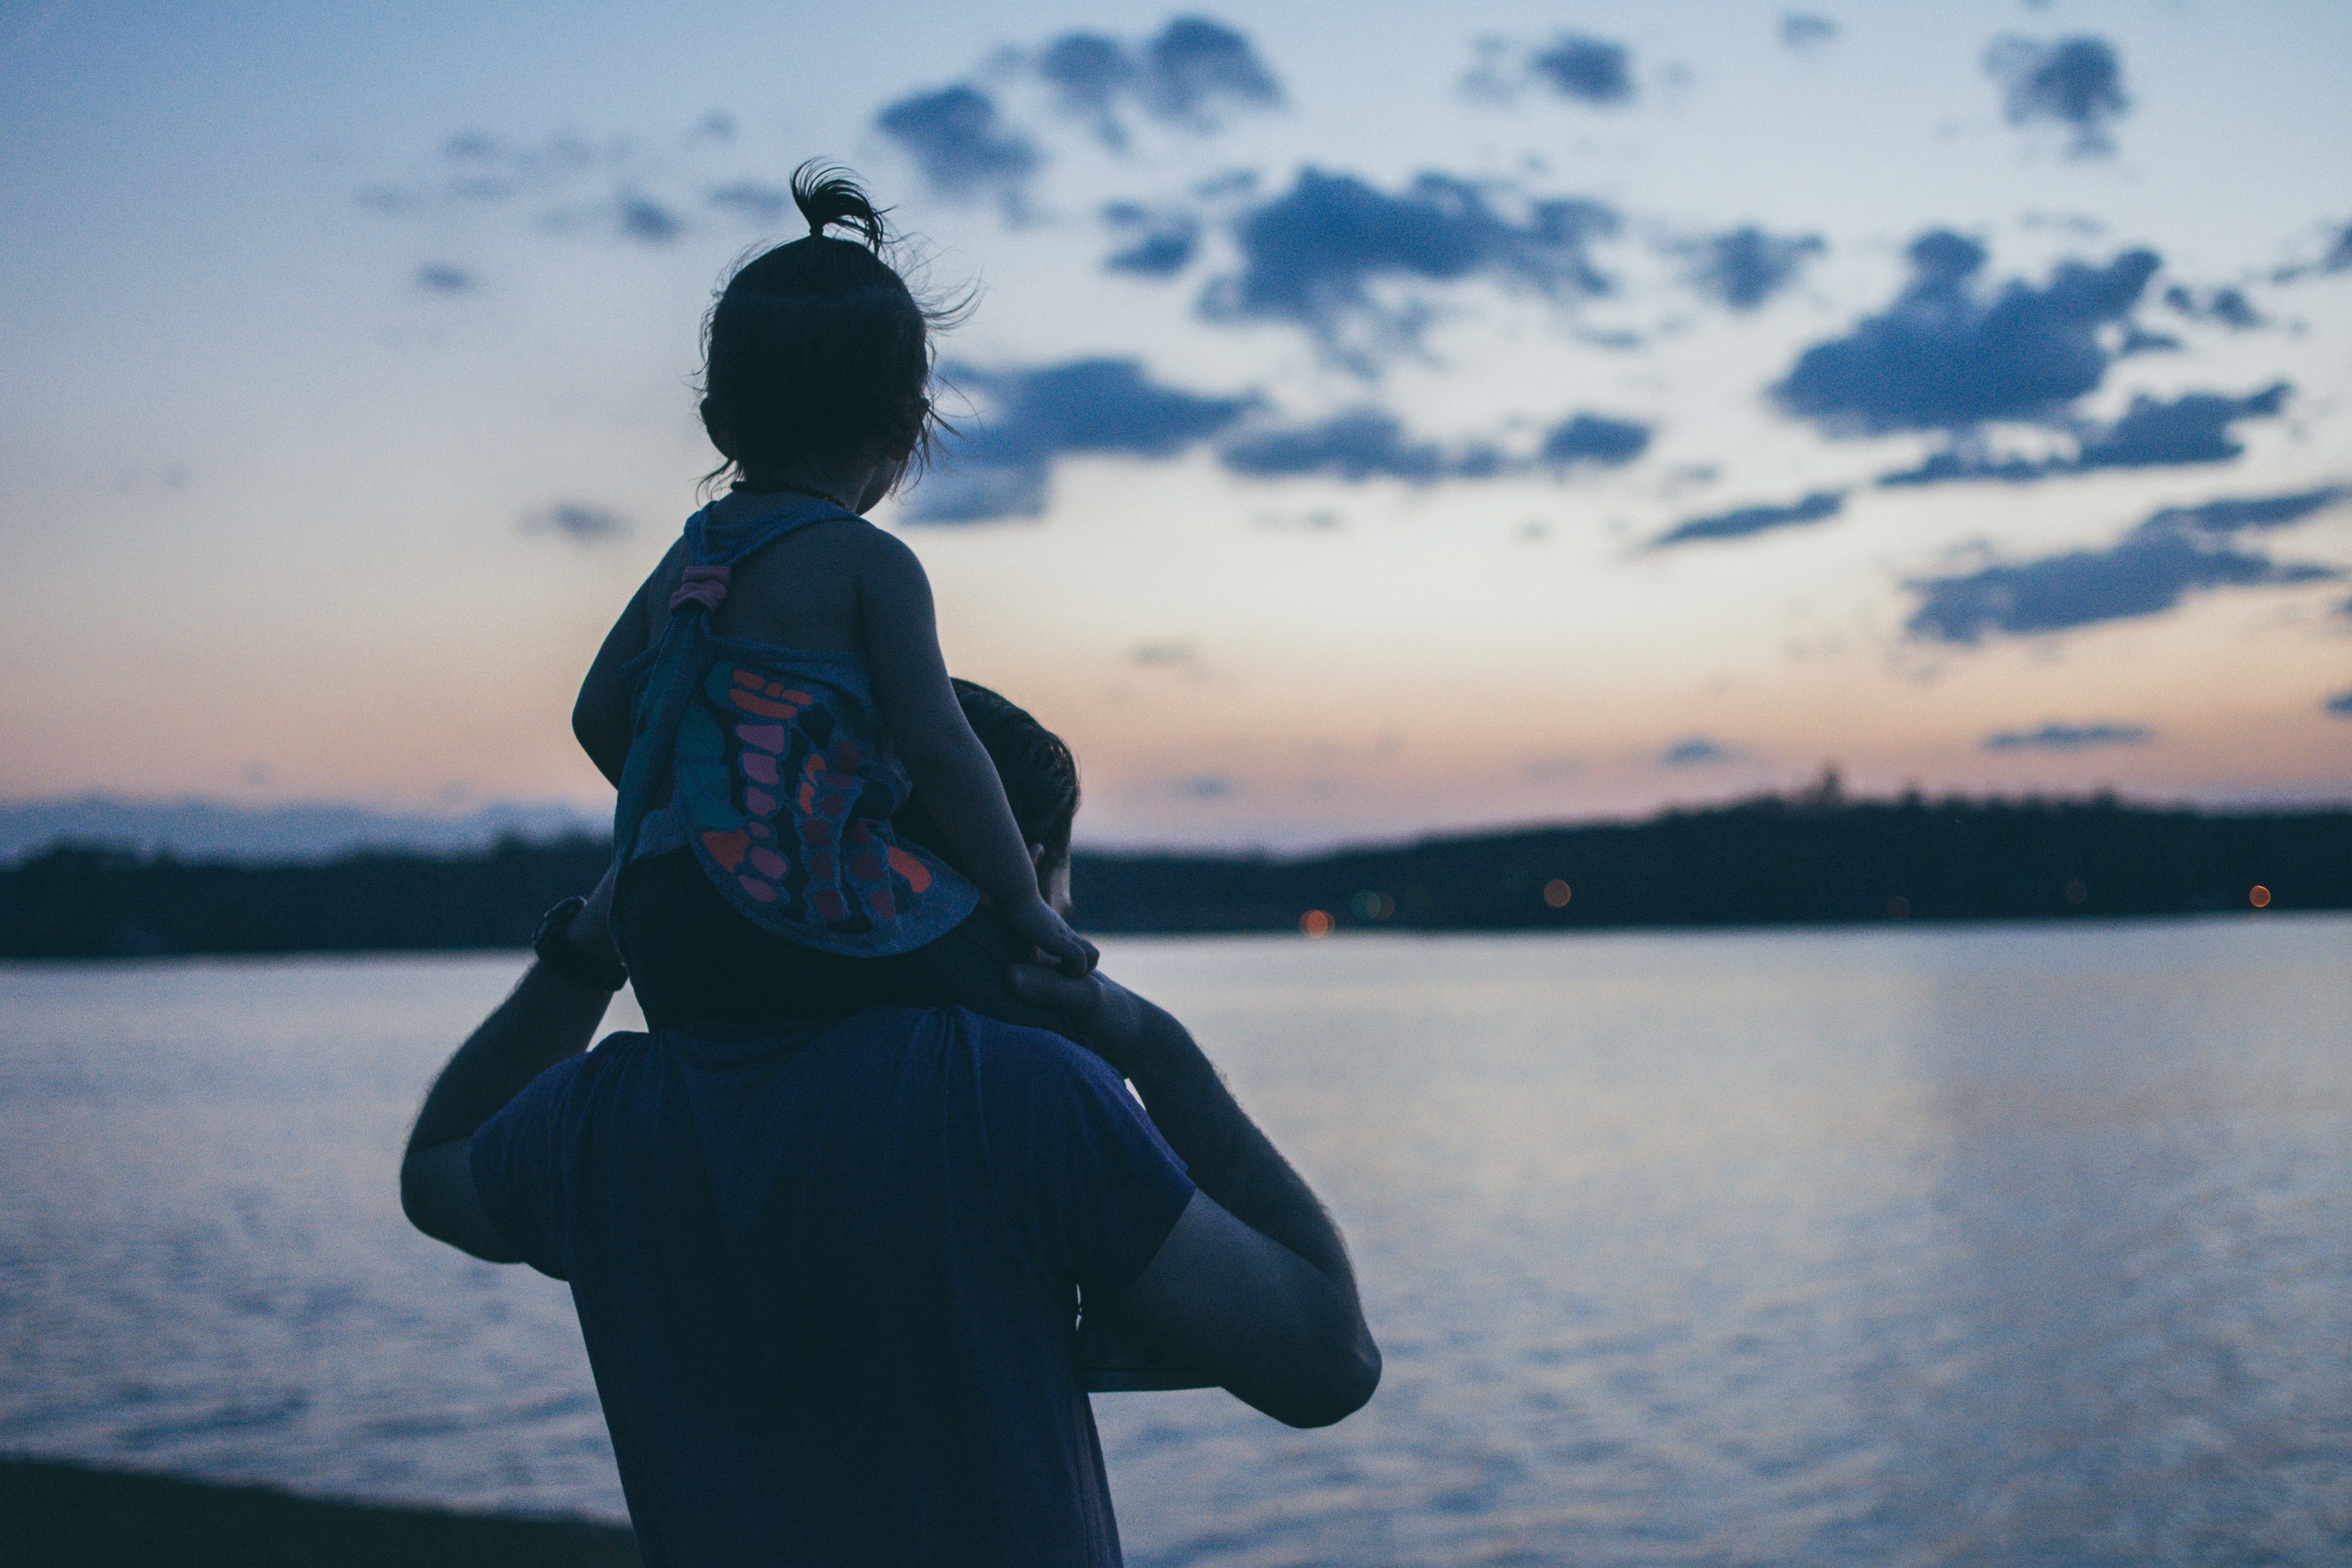 The cost of living crisis will have a deep impact on children whose families are struggling to make ends meet. : Brittani Burns, Unsplash Unsplash licence